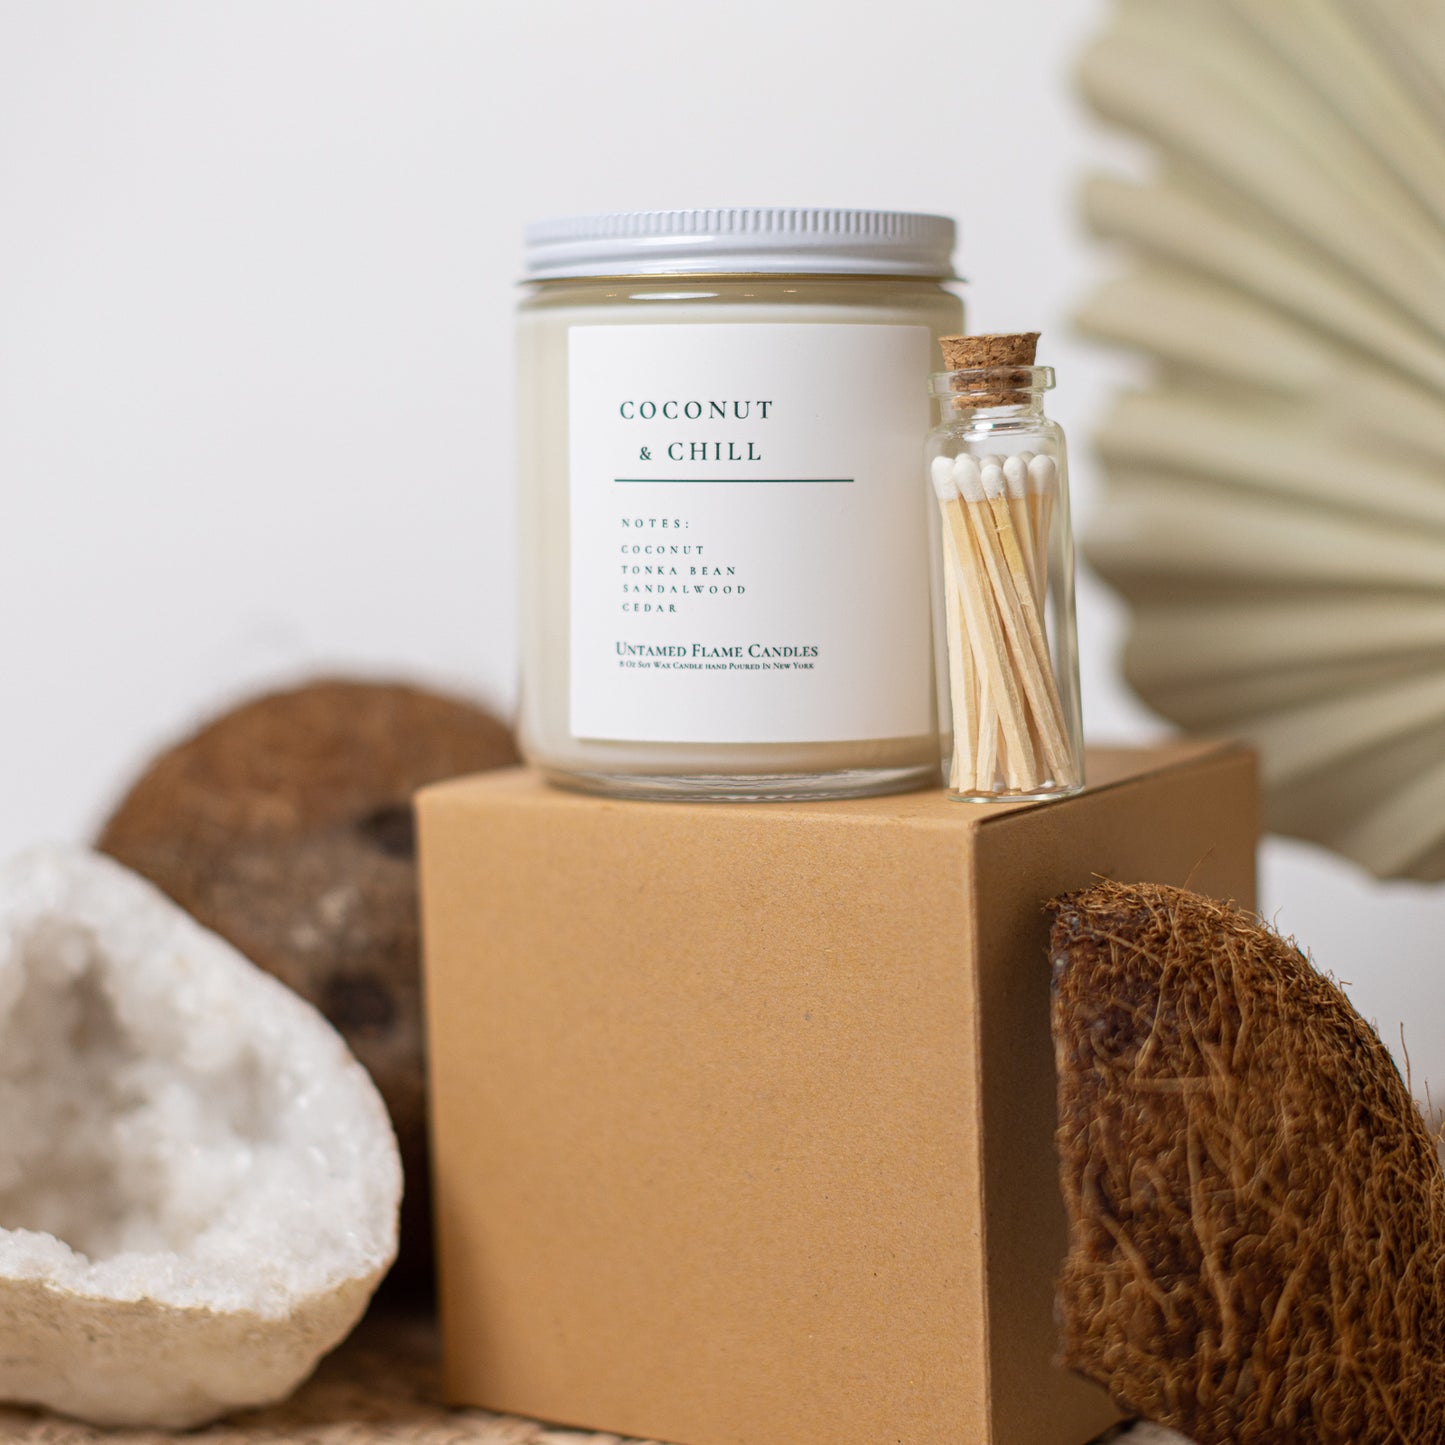 By the Fire - Coconut Soy Blend Candle – Dark Horse Handcrafted